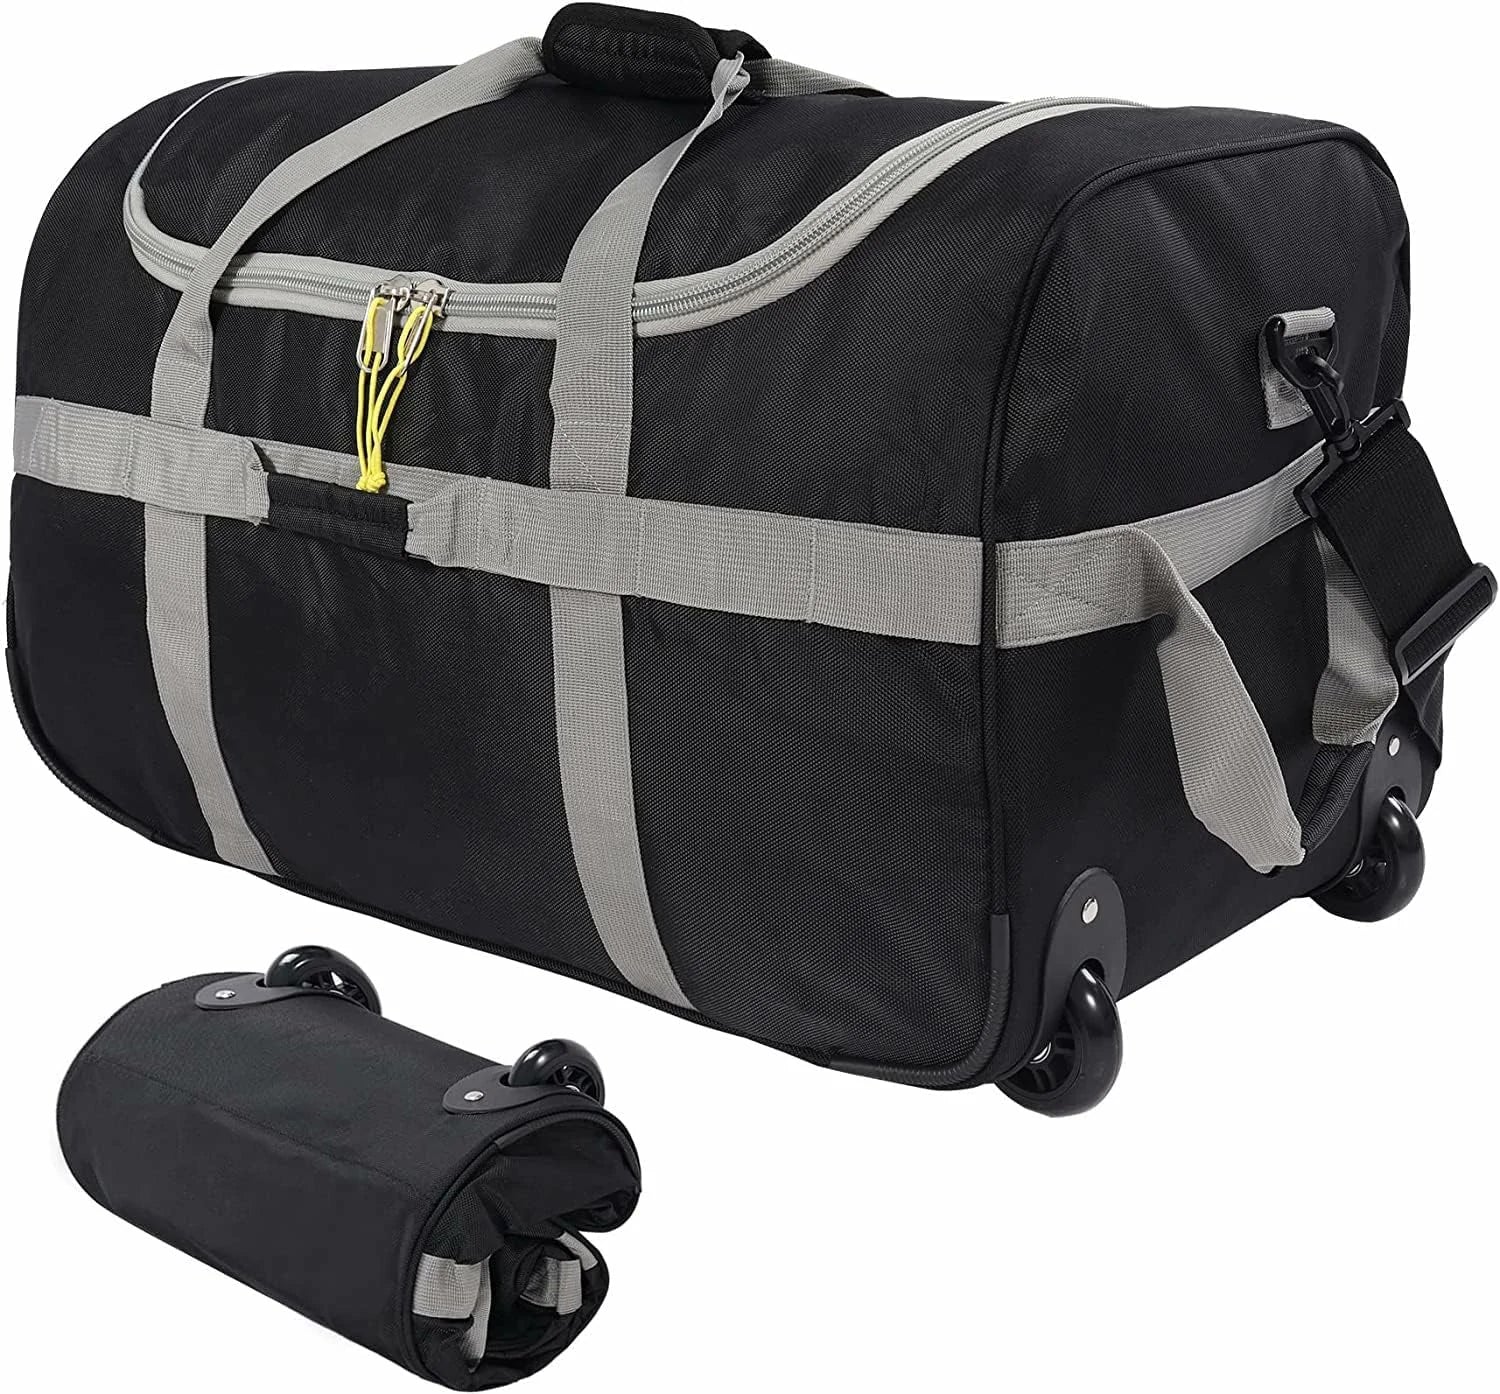 REDCAMP Foldable Duffle Bag with Wheels